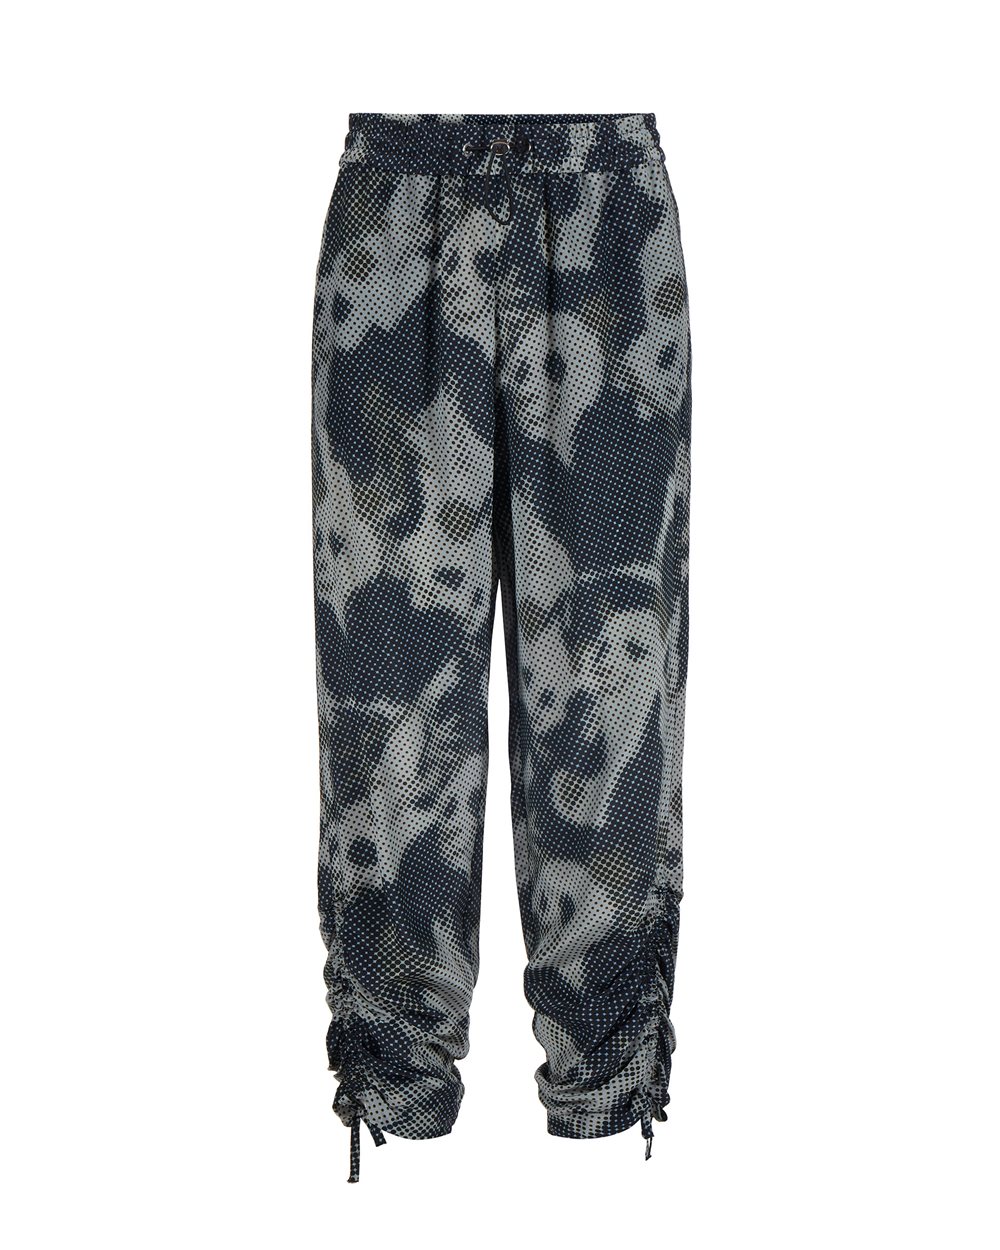 Pants with pixel print - VALENTINE'S DAY GIFTS | Iceberg - Official Website